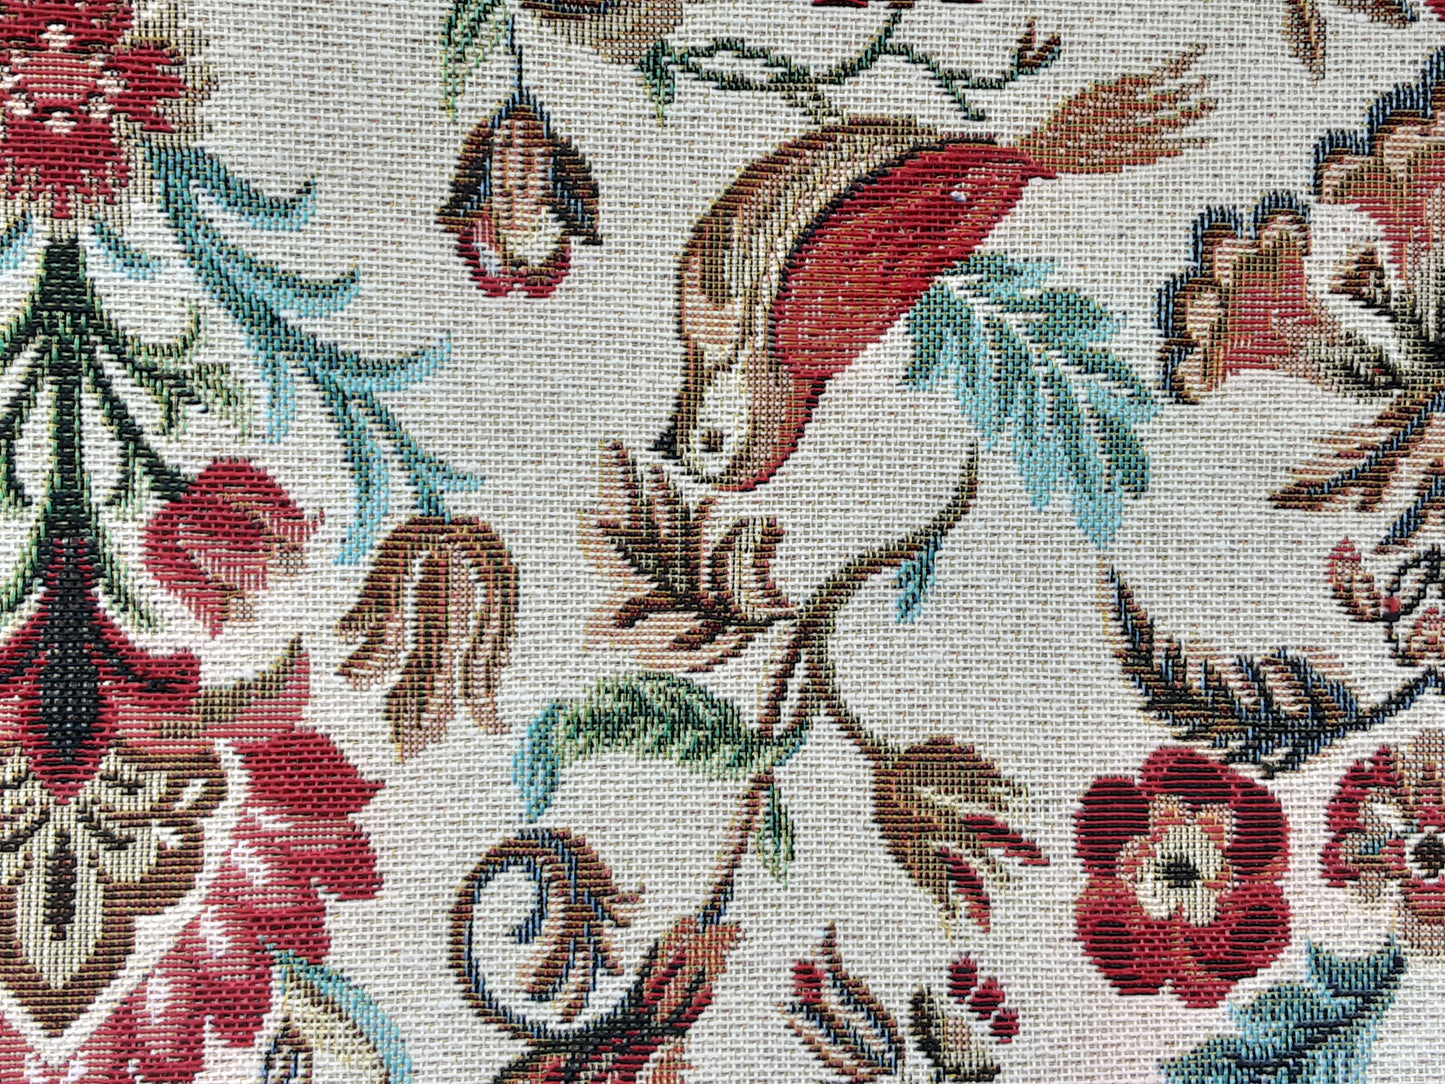 William Tapestry Cotton Rich Fabric